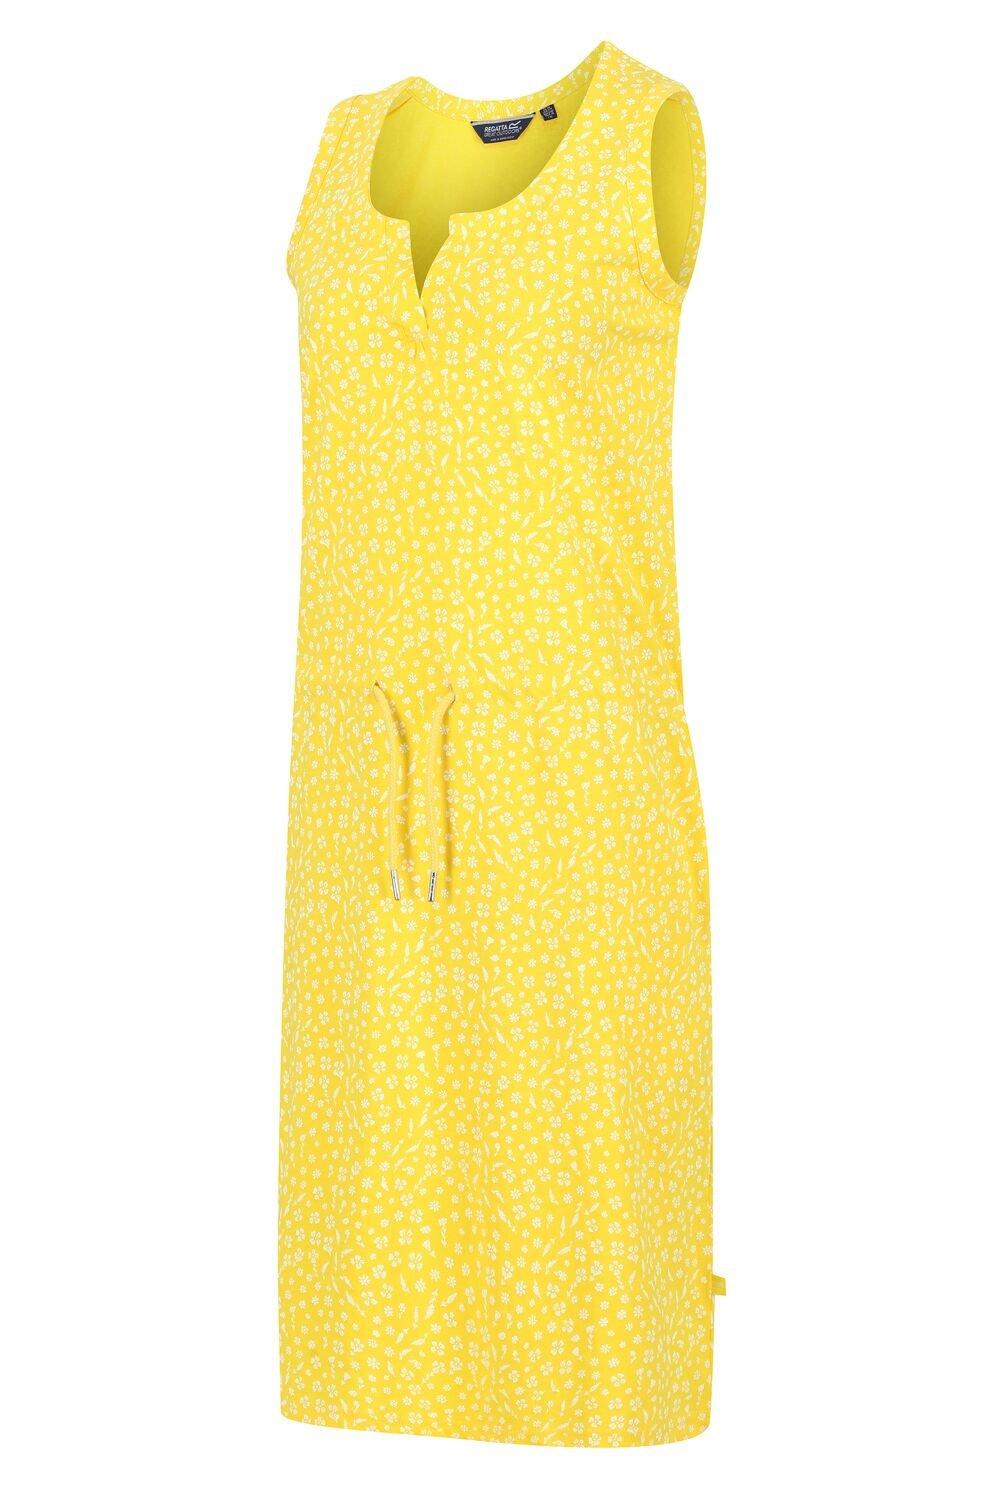 Coolweave Coolweave Cotton 'Fahari' Sleeveless Dress